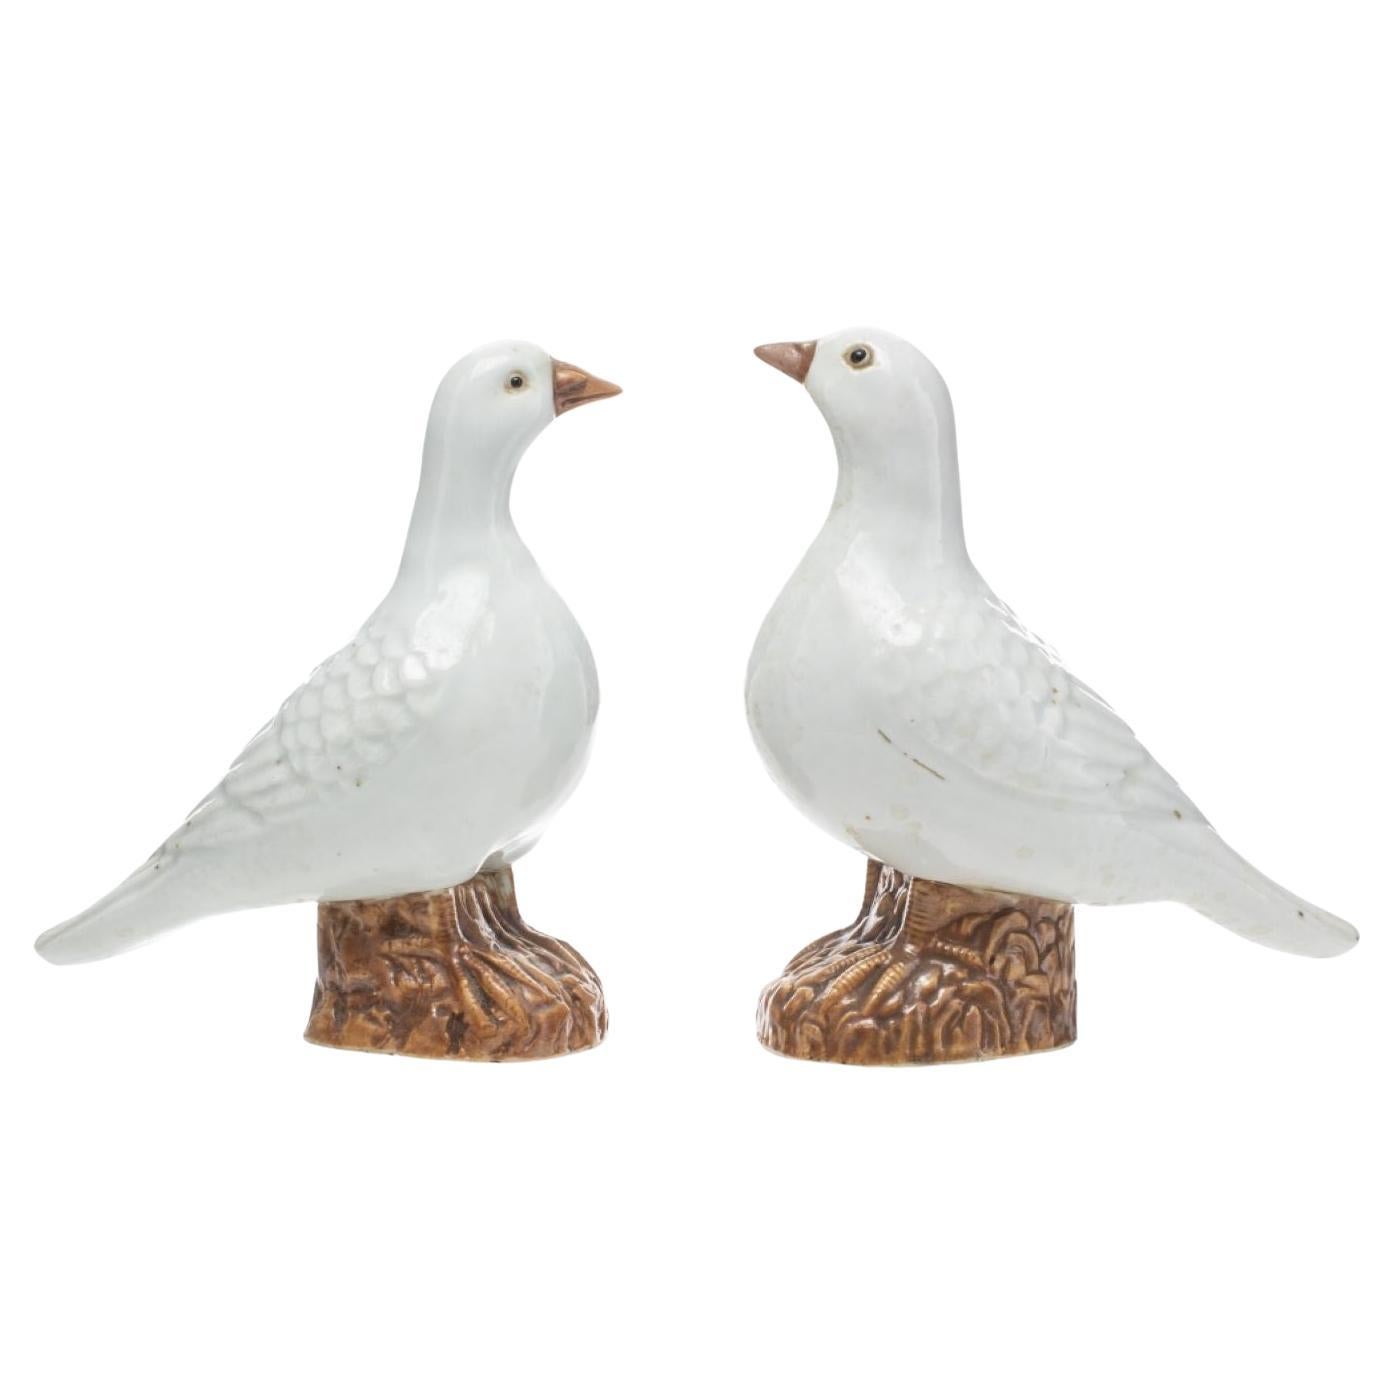 Chinese Export White Porcelain Birds, Pair For Sale